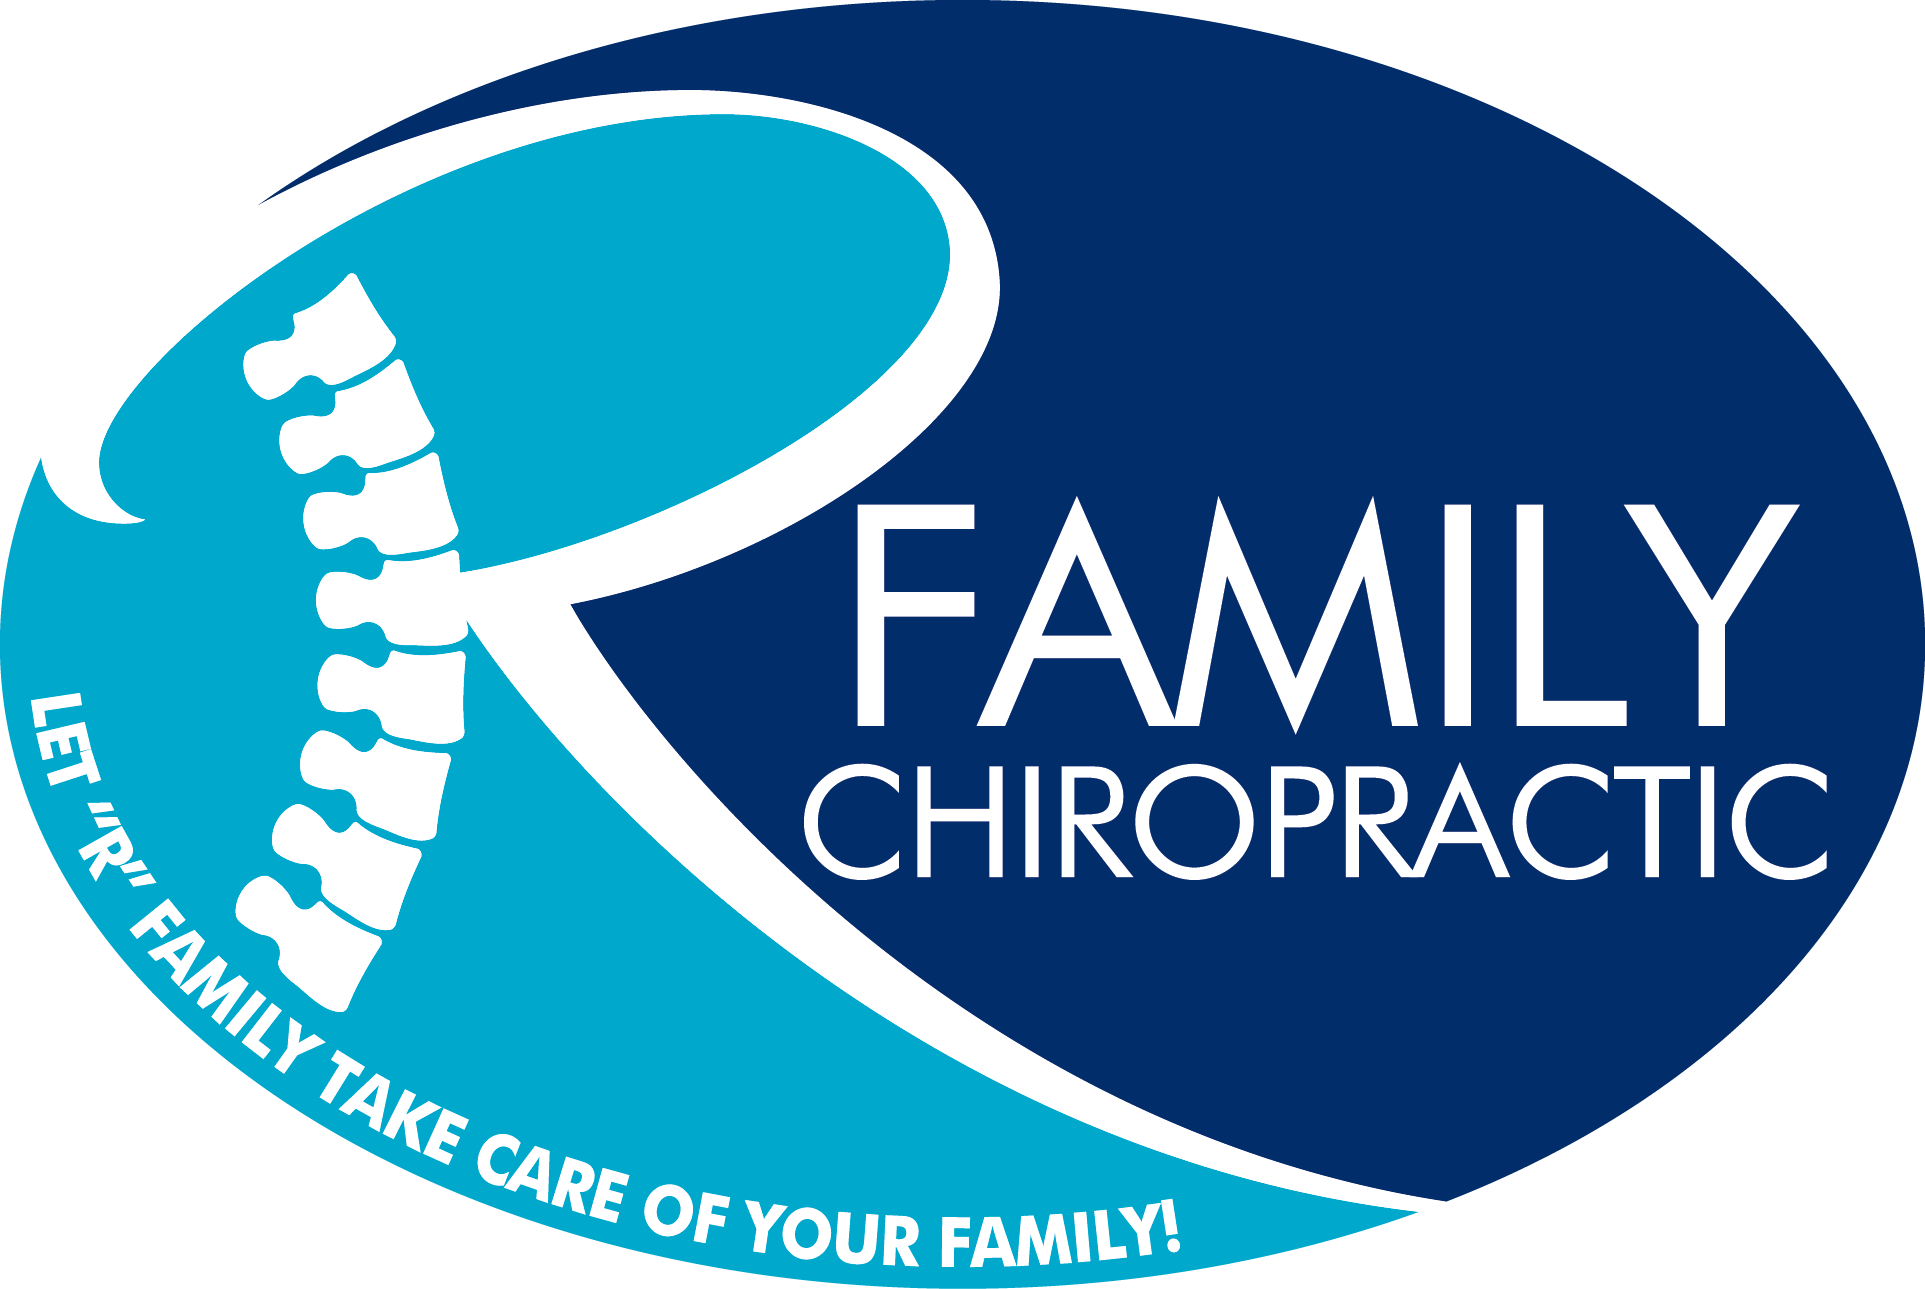 R Family Chiropractic